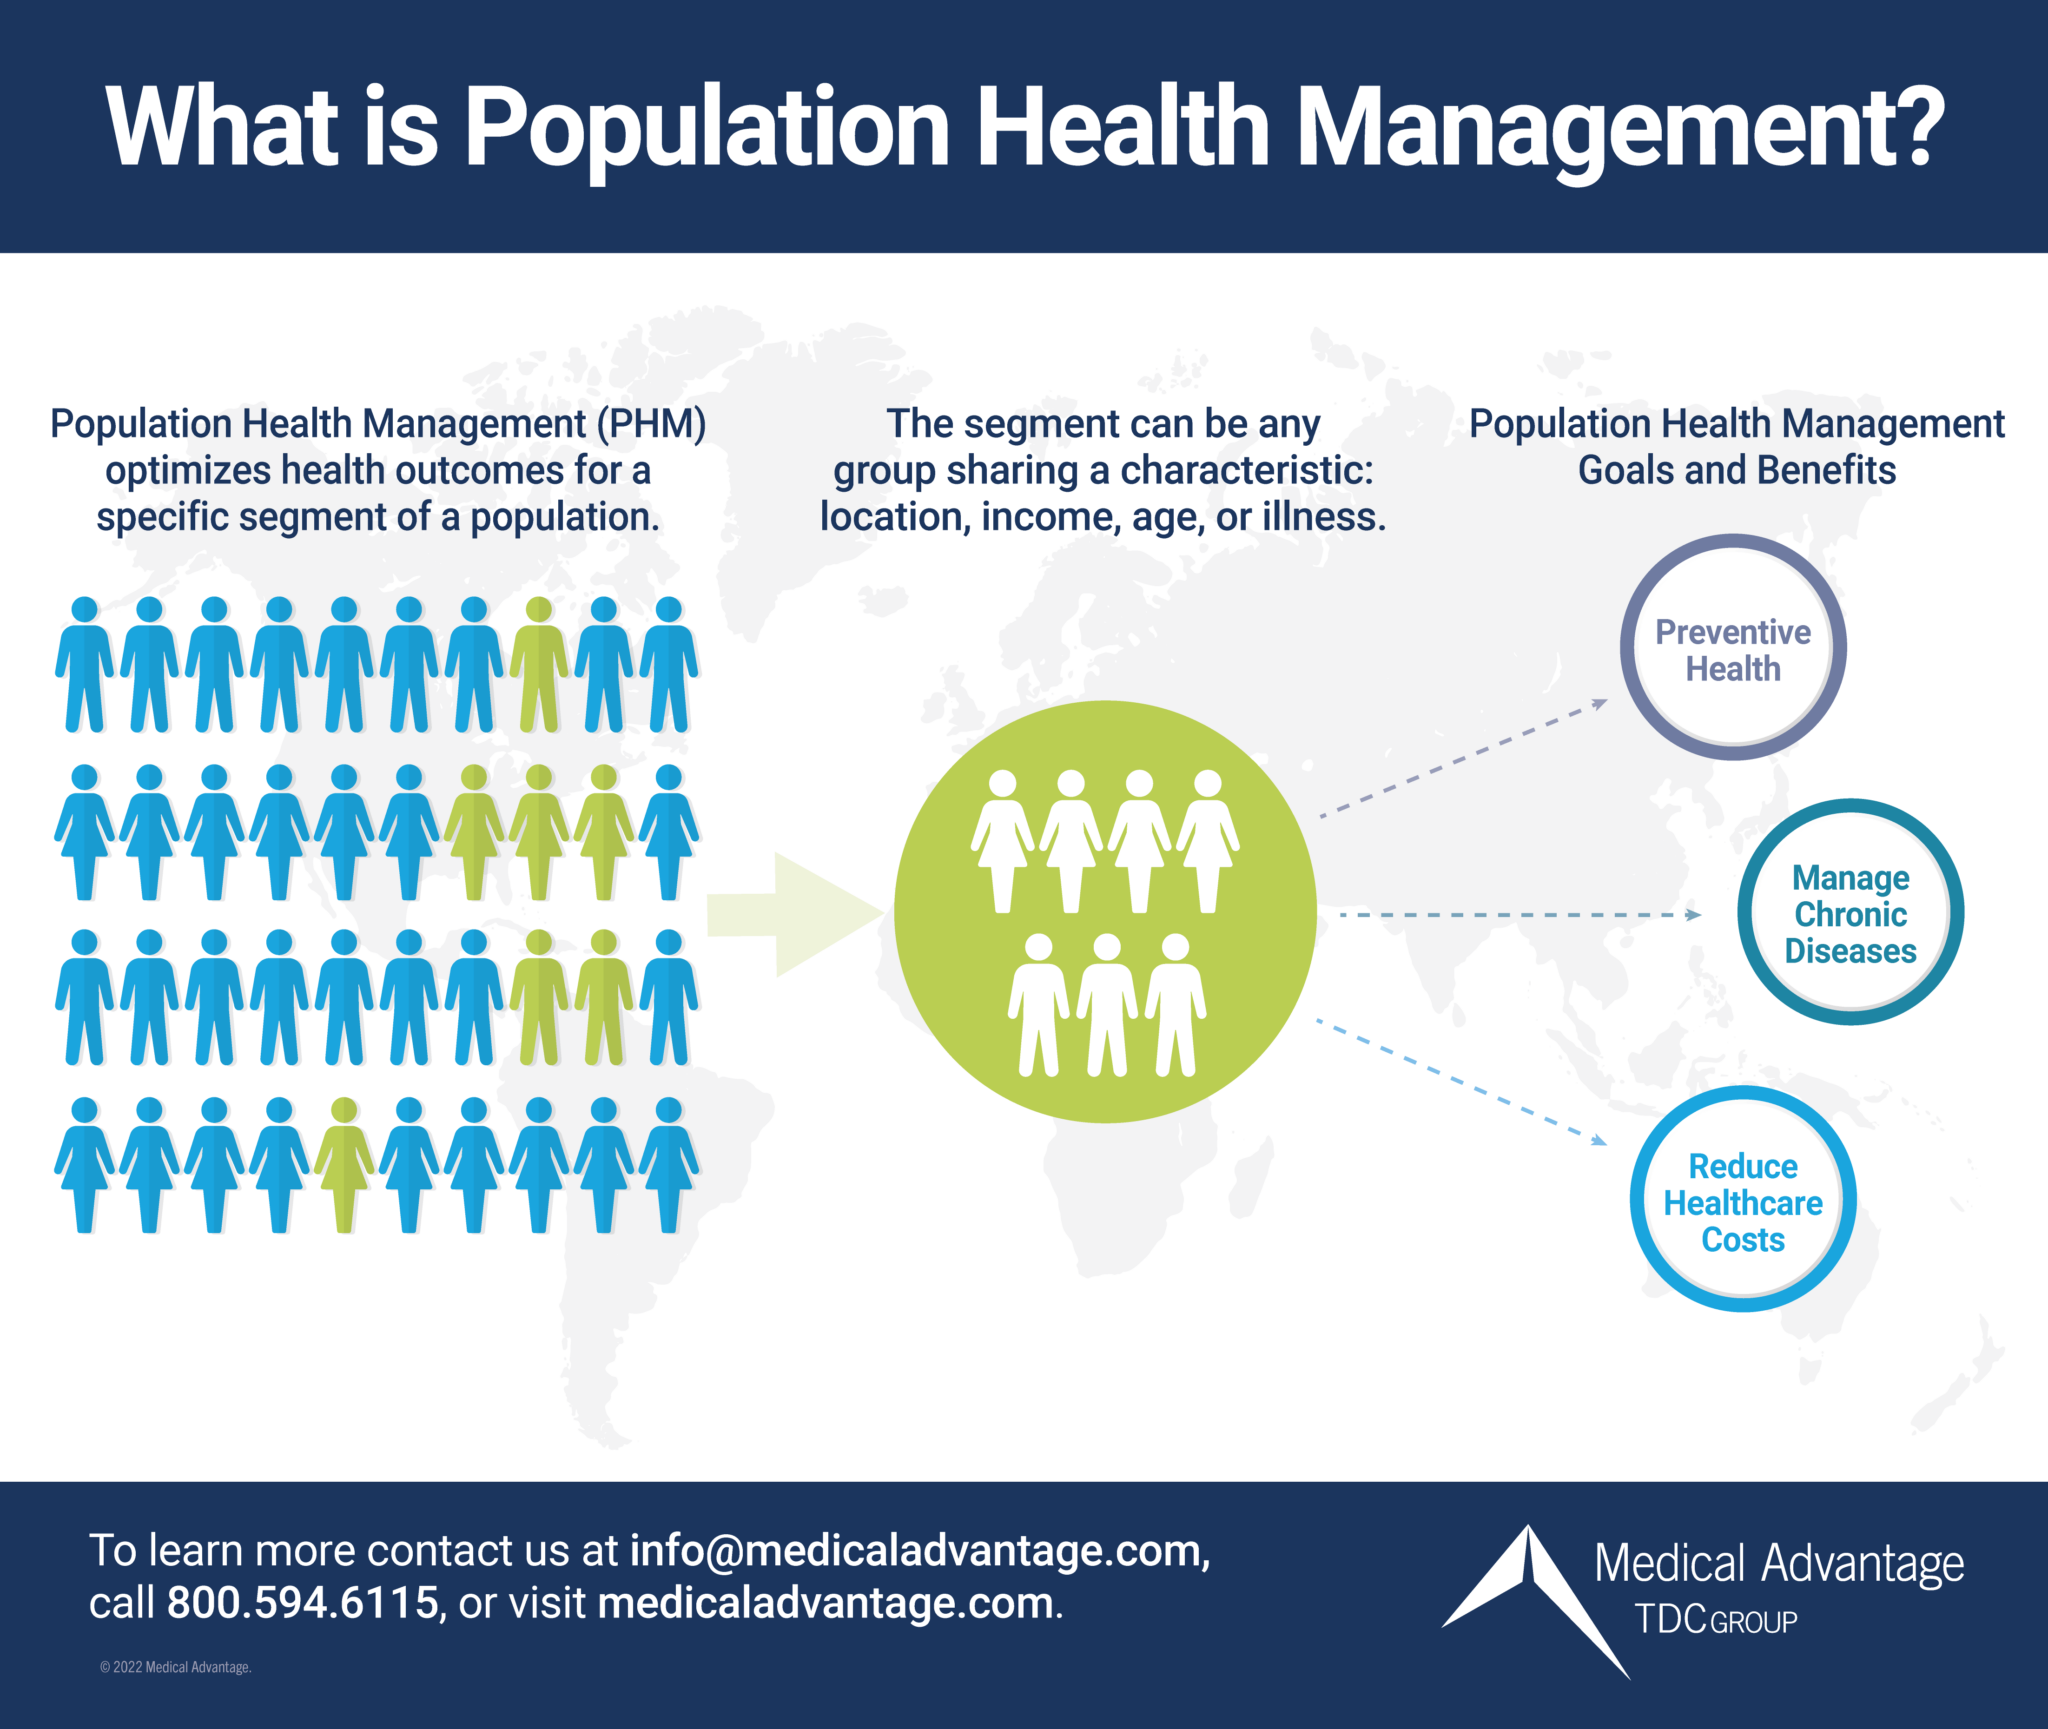 What is Population Health Management?